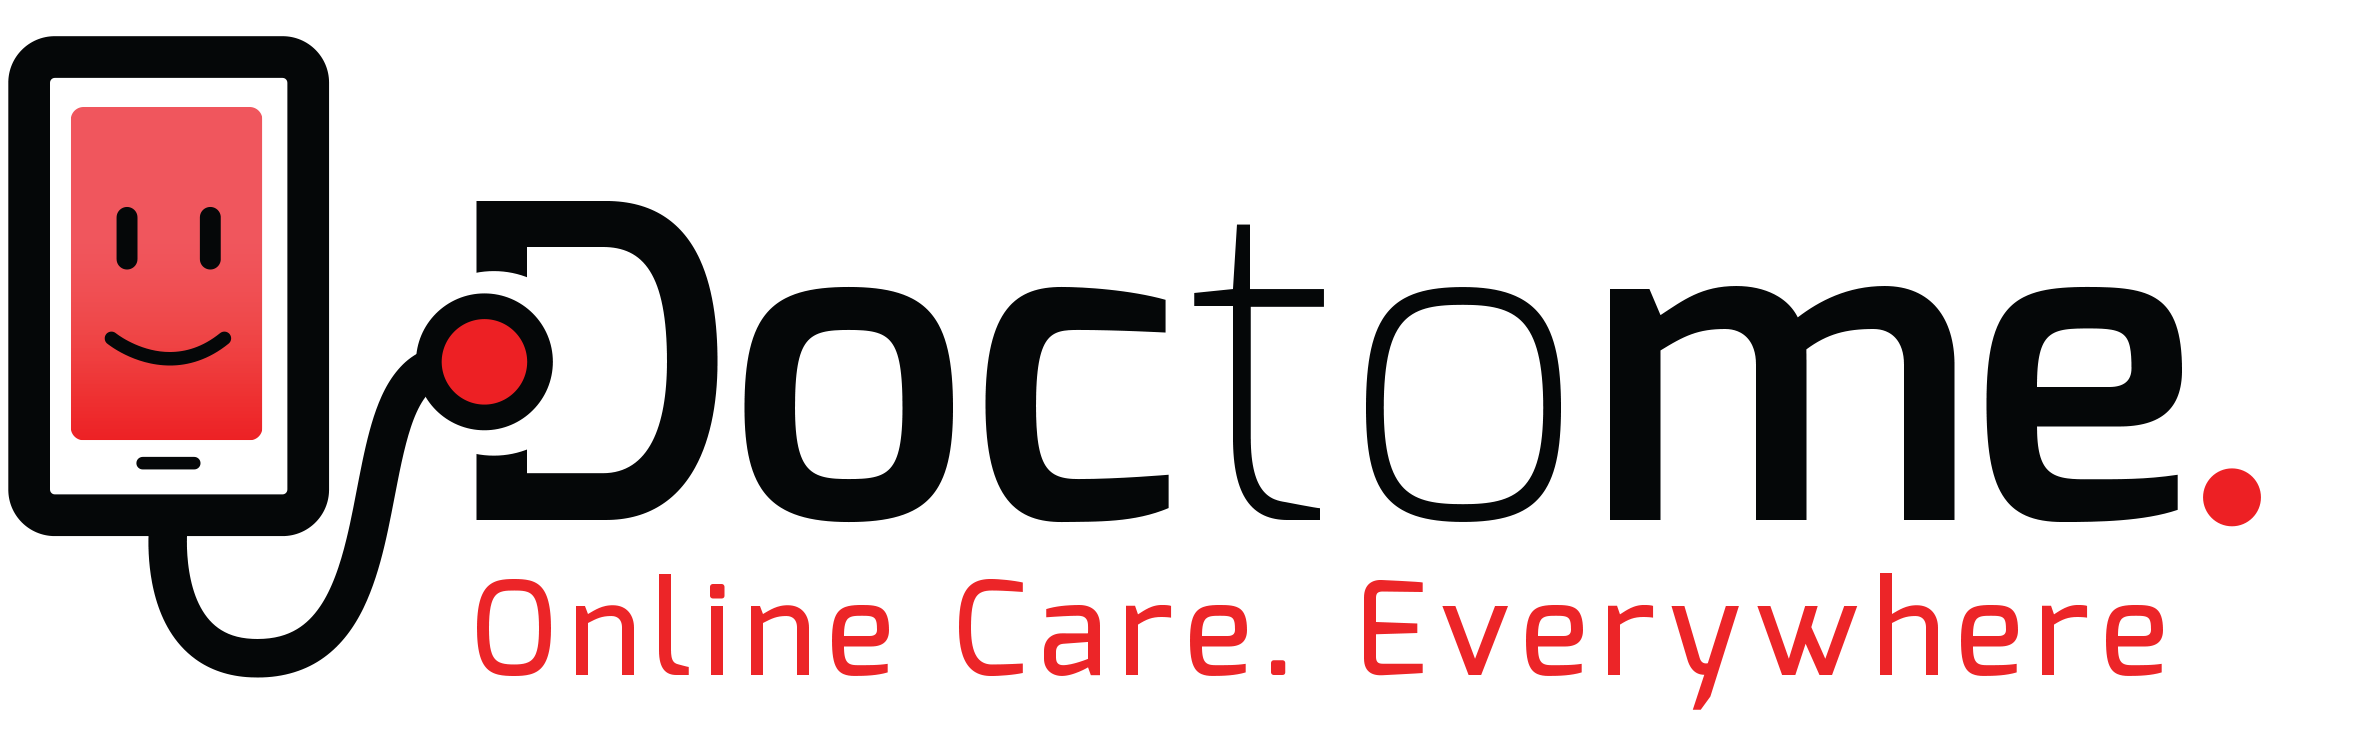 Doctome logo